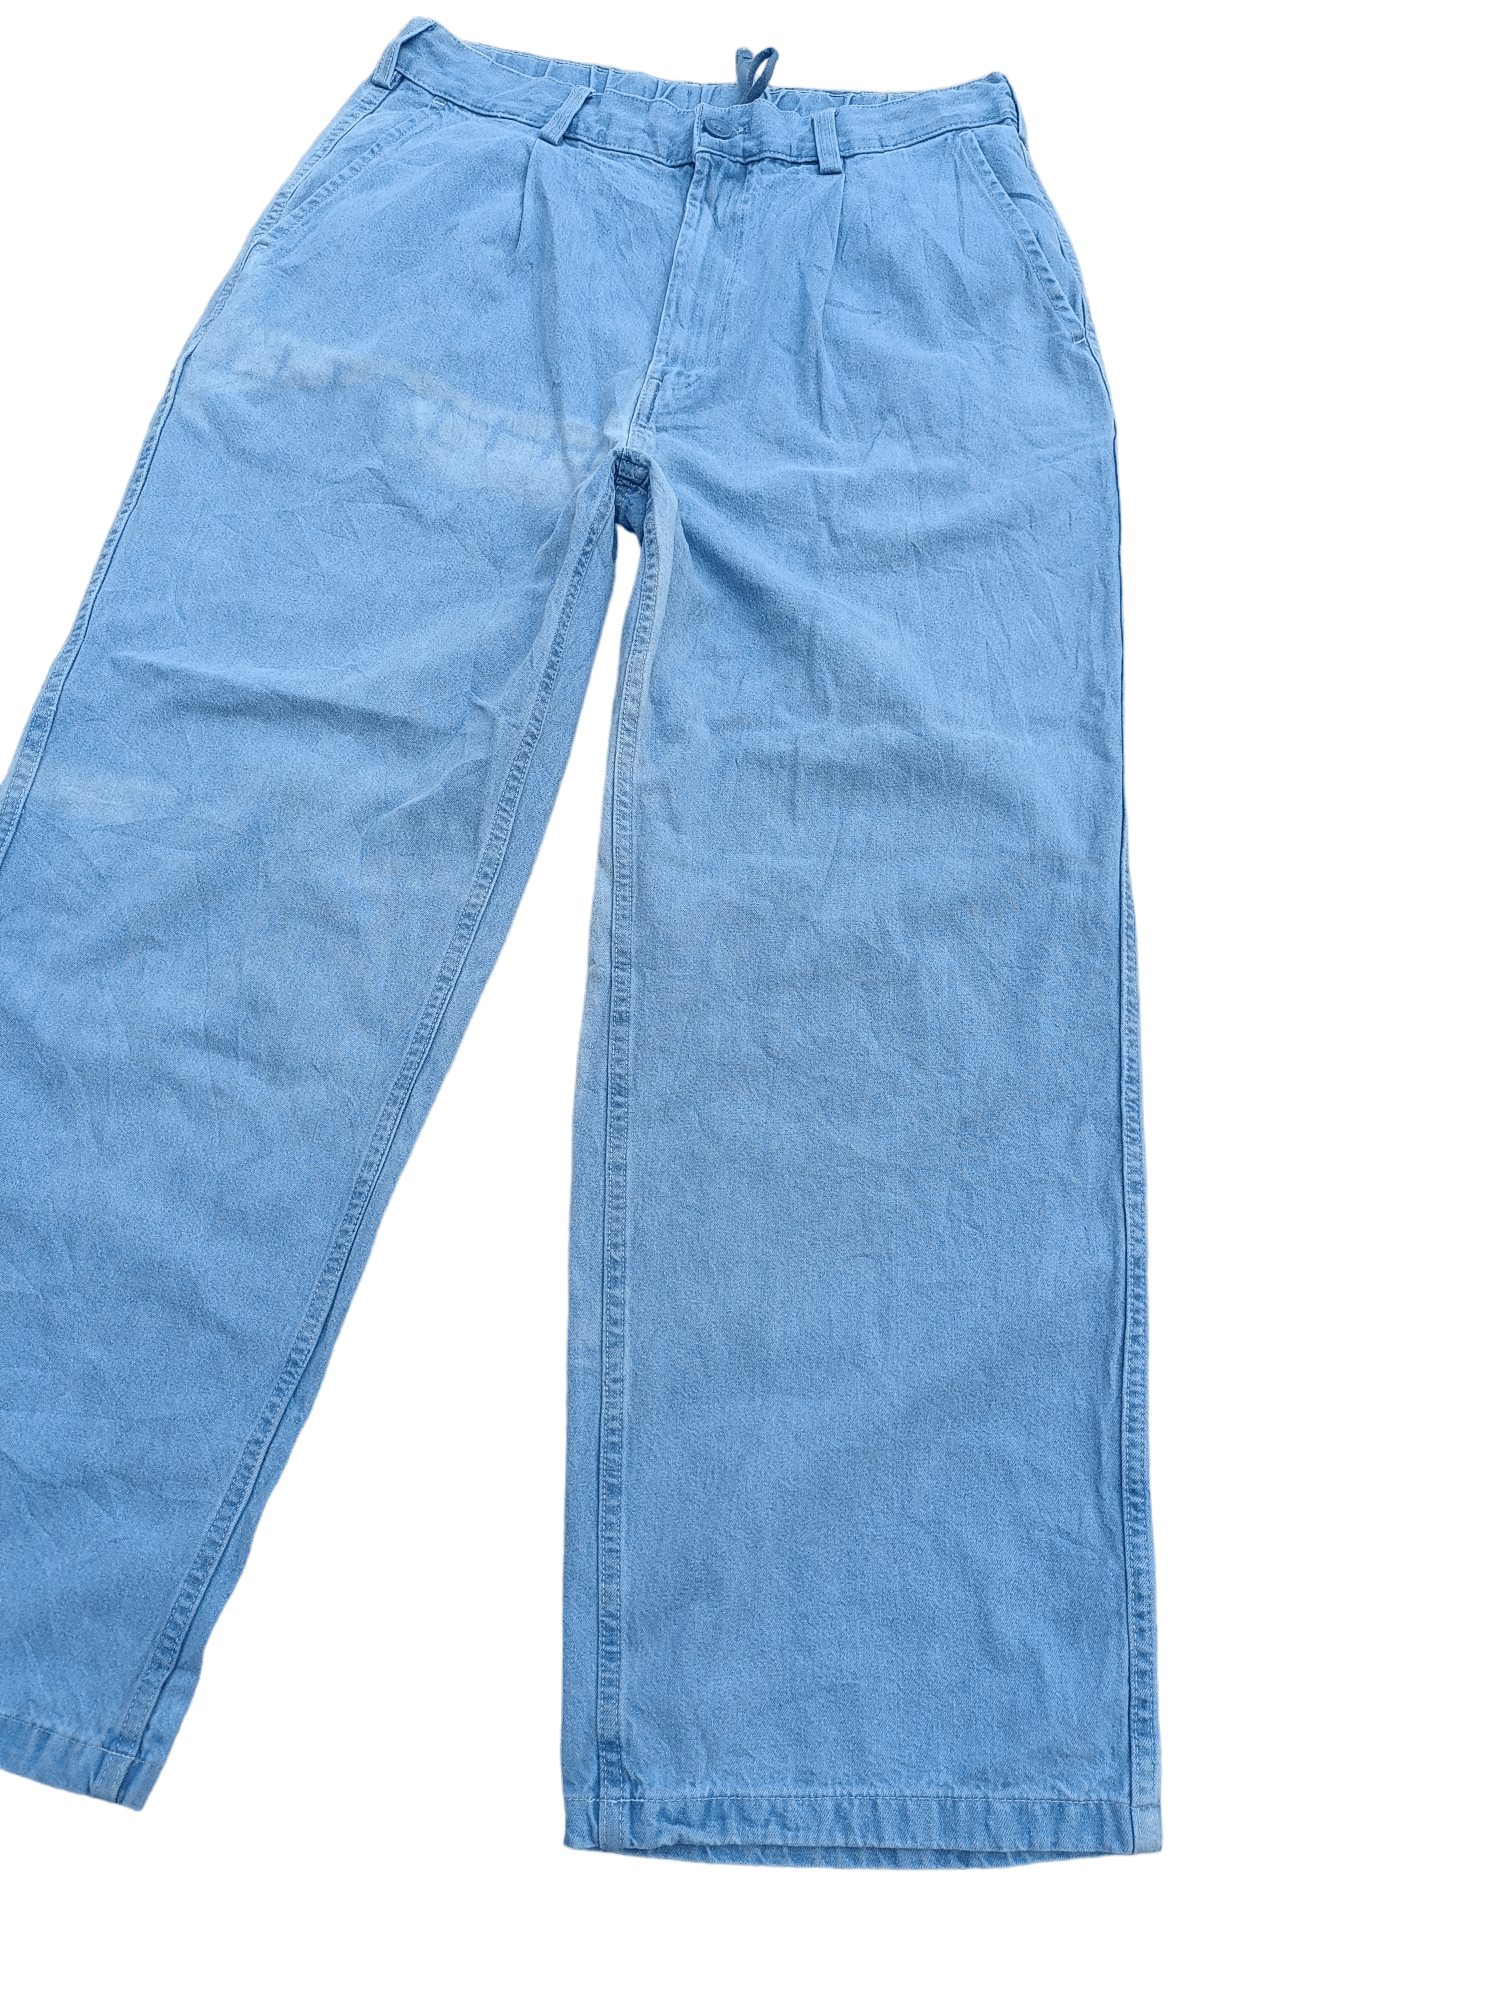 Japanese Brand Vintage Japanese Gu Baggy Style Flare Jeans 30x30 Size US 32 / EU 48 - 2 Preview